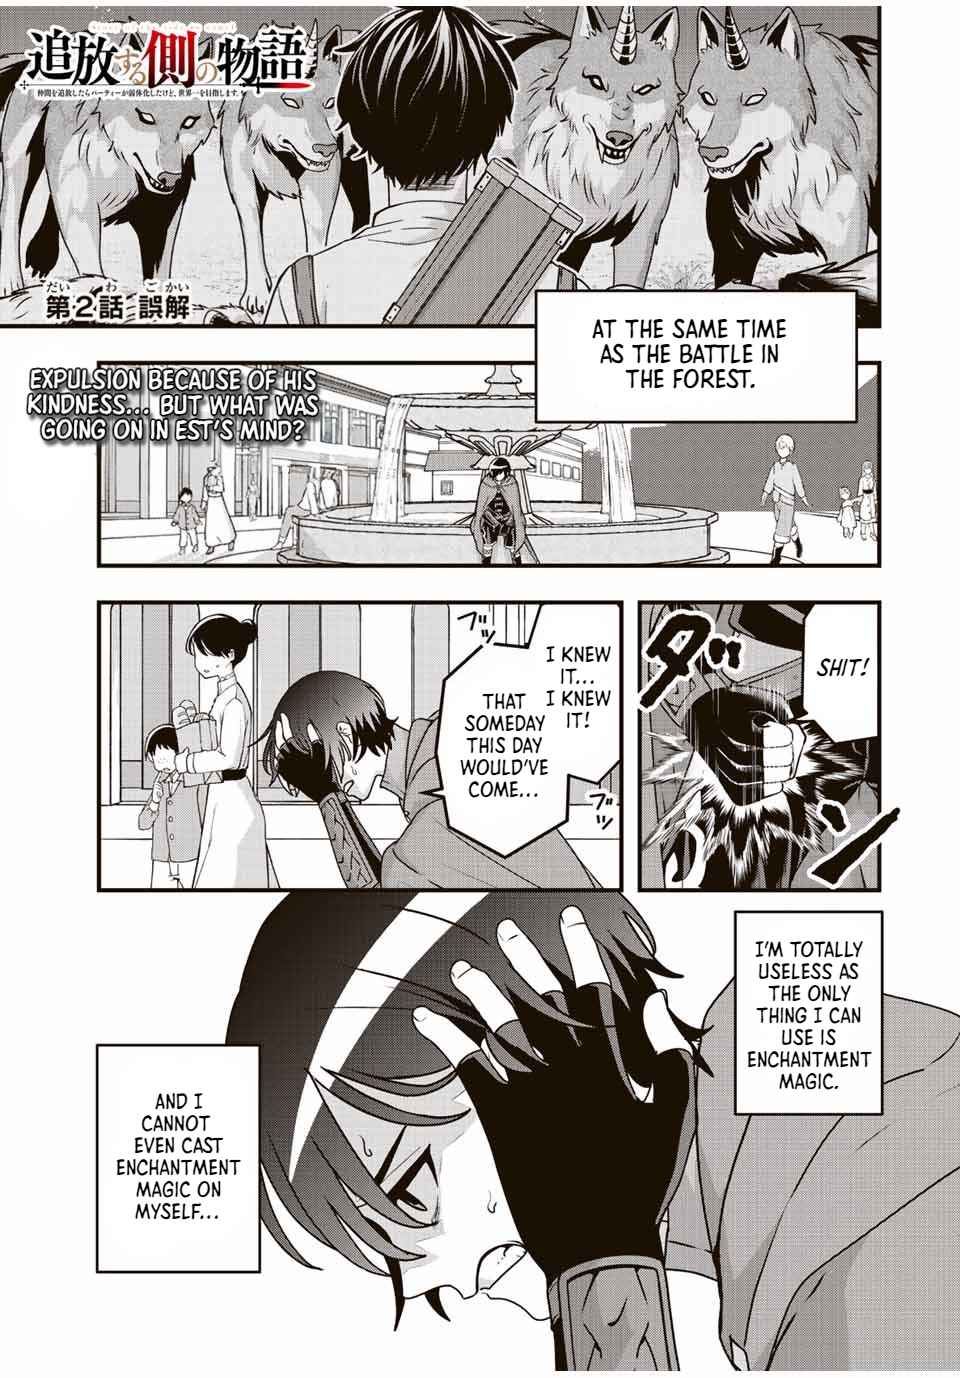 The Story Of The Banisher Side After Banishing The Party Member - The Party Was Weakened, But We Aim To Be The Best In The World Chapter 2-eng-li - Page 1